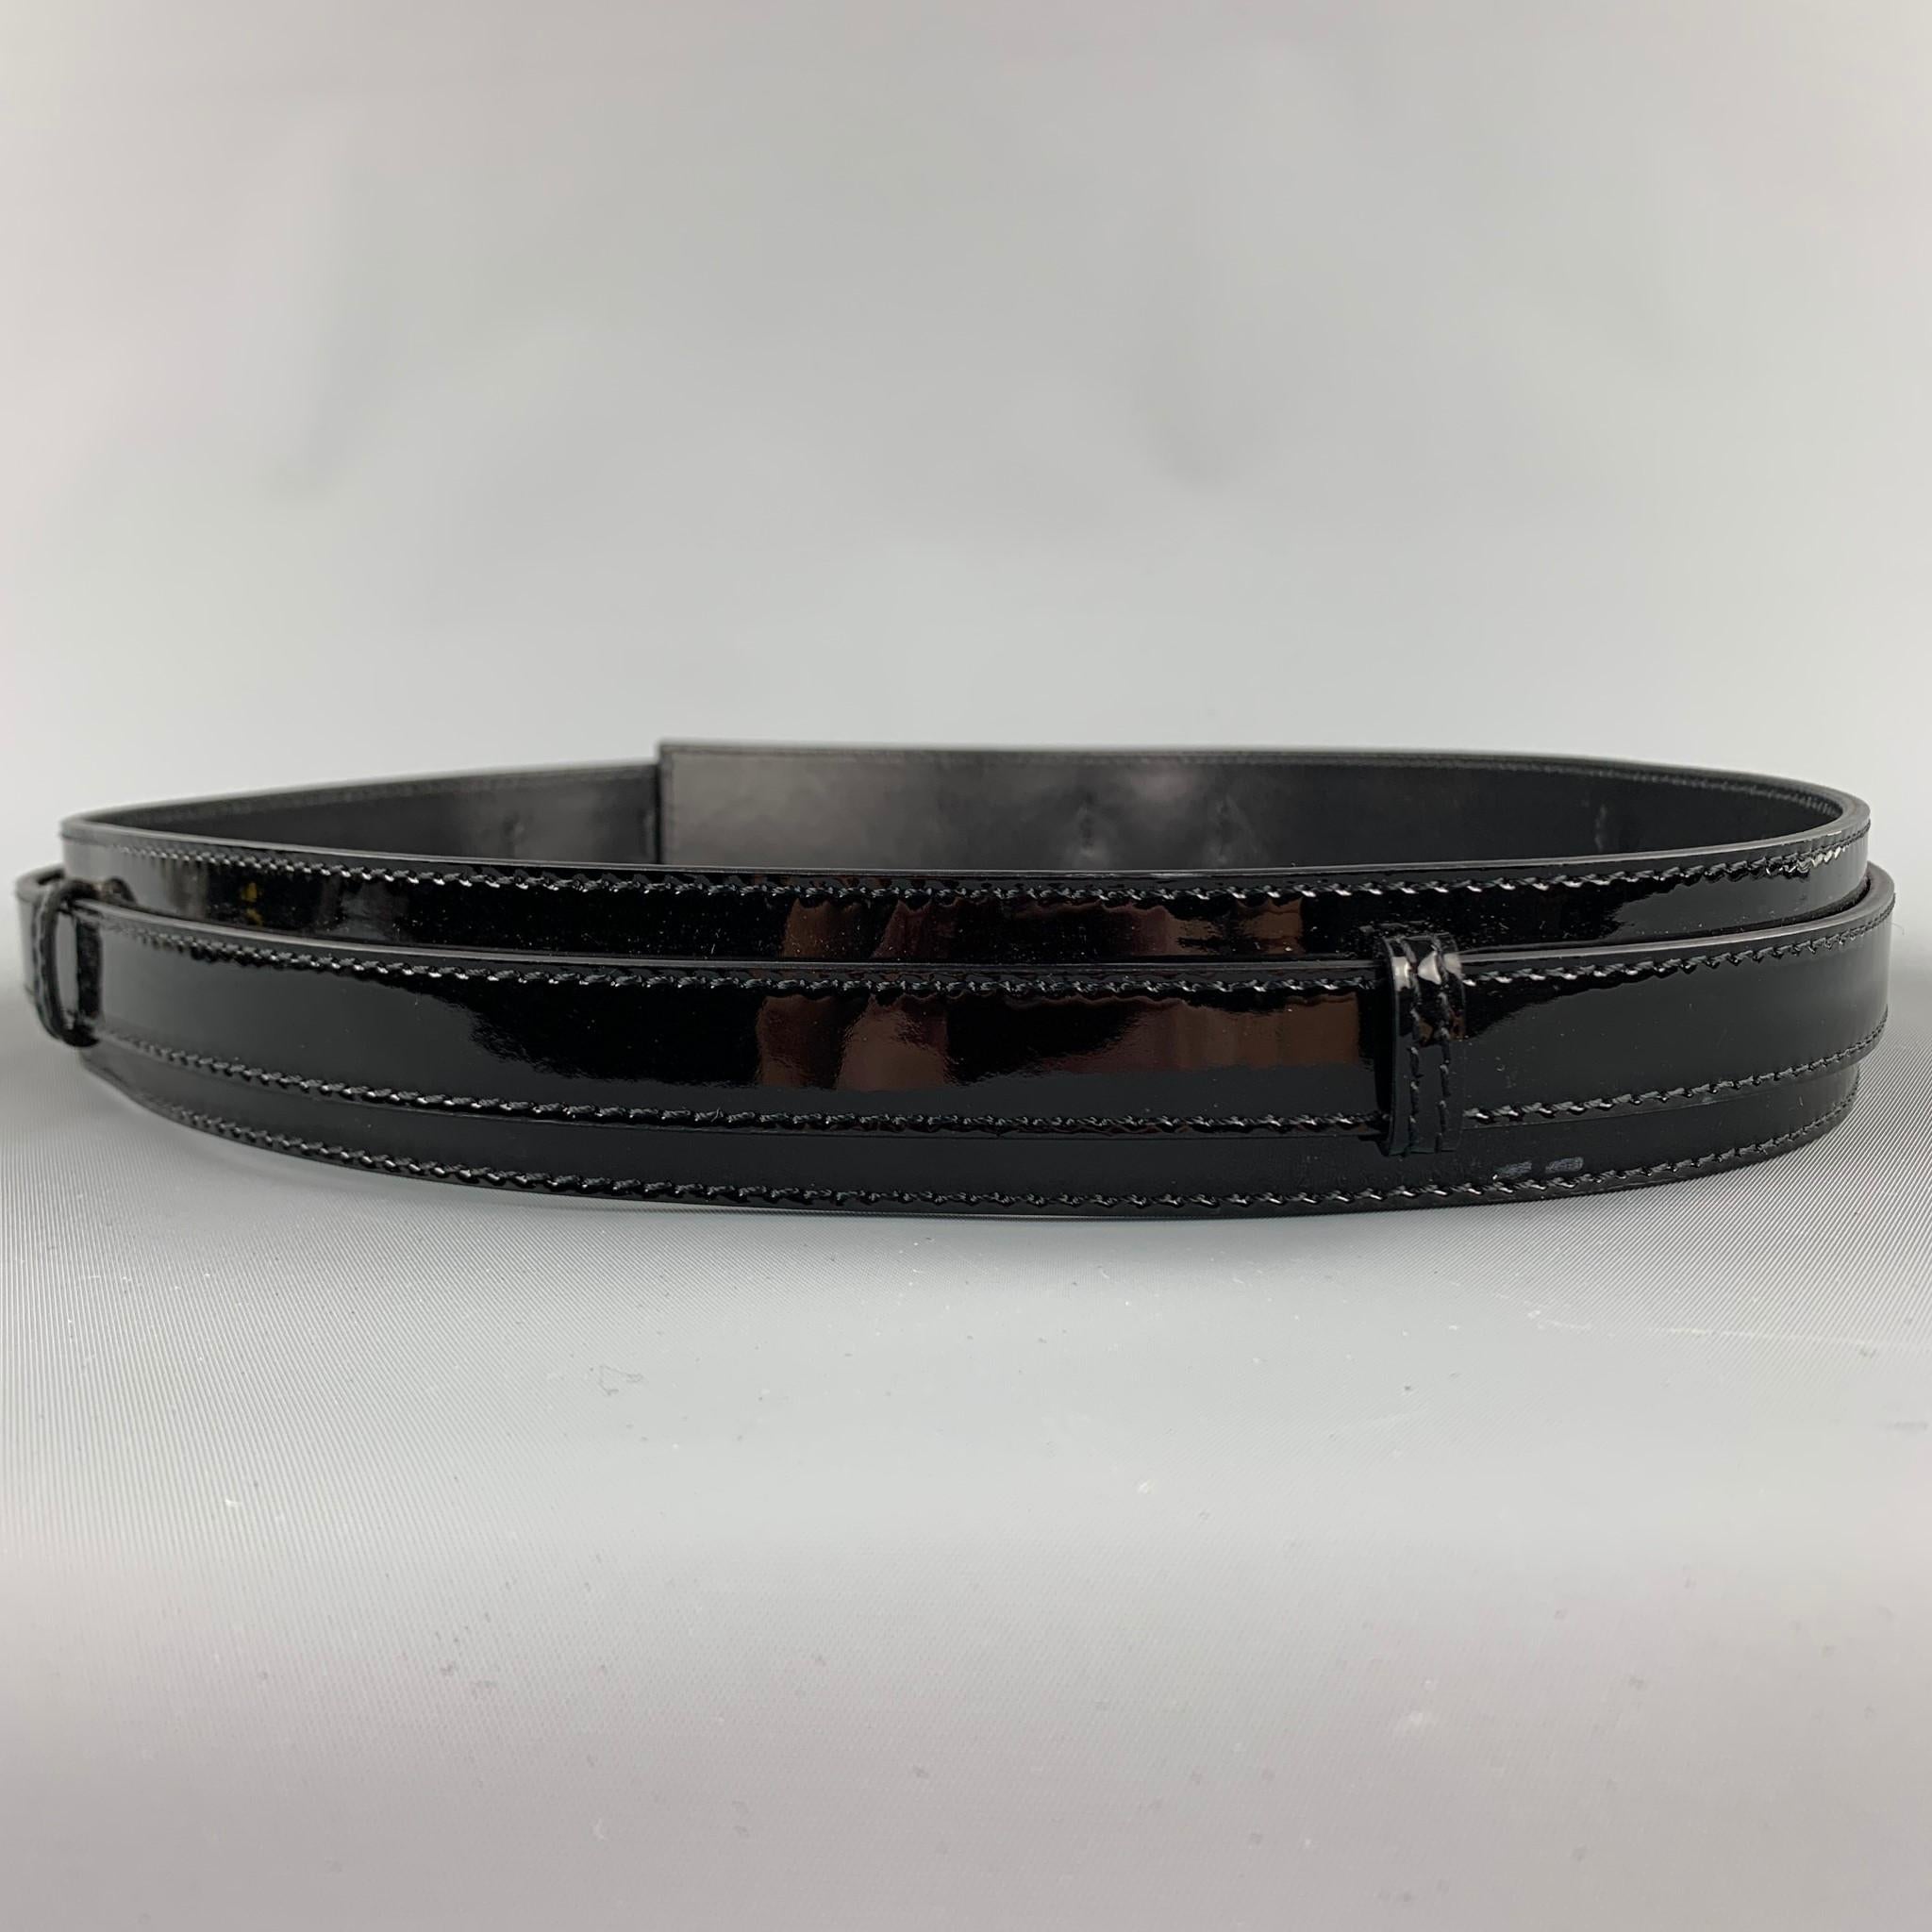 BURBERRY PRORSUM belt comes in a black patent leather featuring a double strap design and a buckle closure. Made in Italy.

Very Good Pre-Owned Condition.
Marked: 40/100

Length: 46 in.
Width: 1.5 in.
Fits: 36 in. - 40 in.